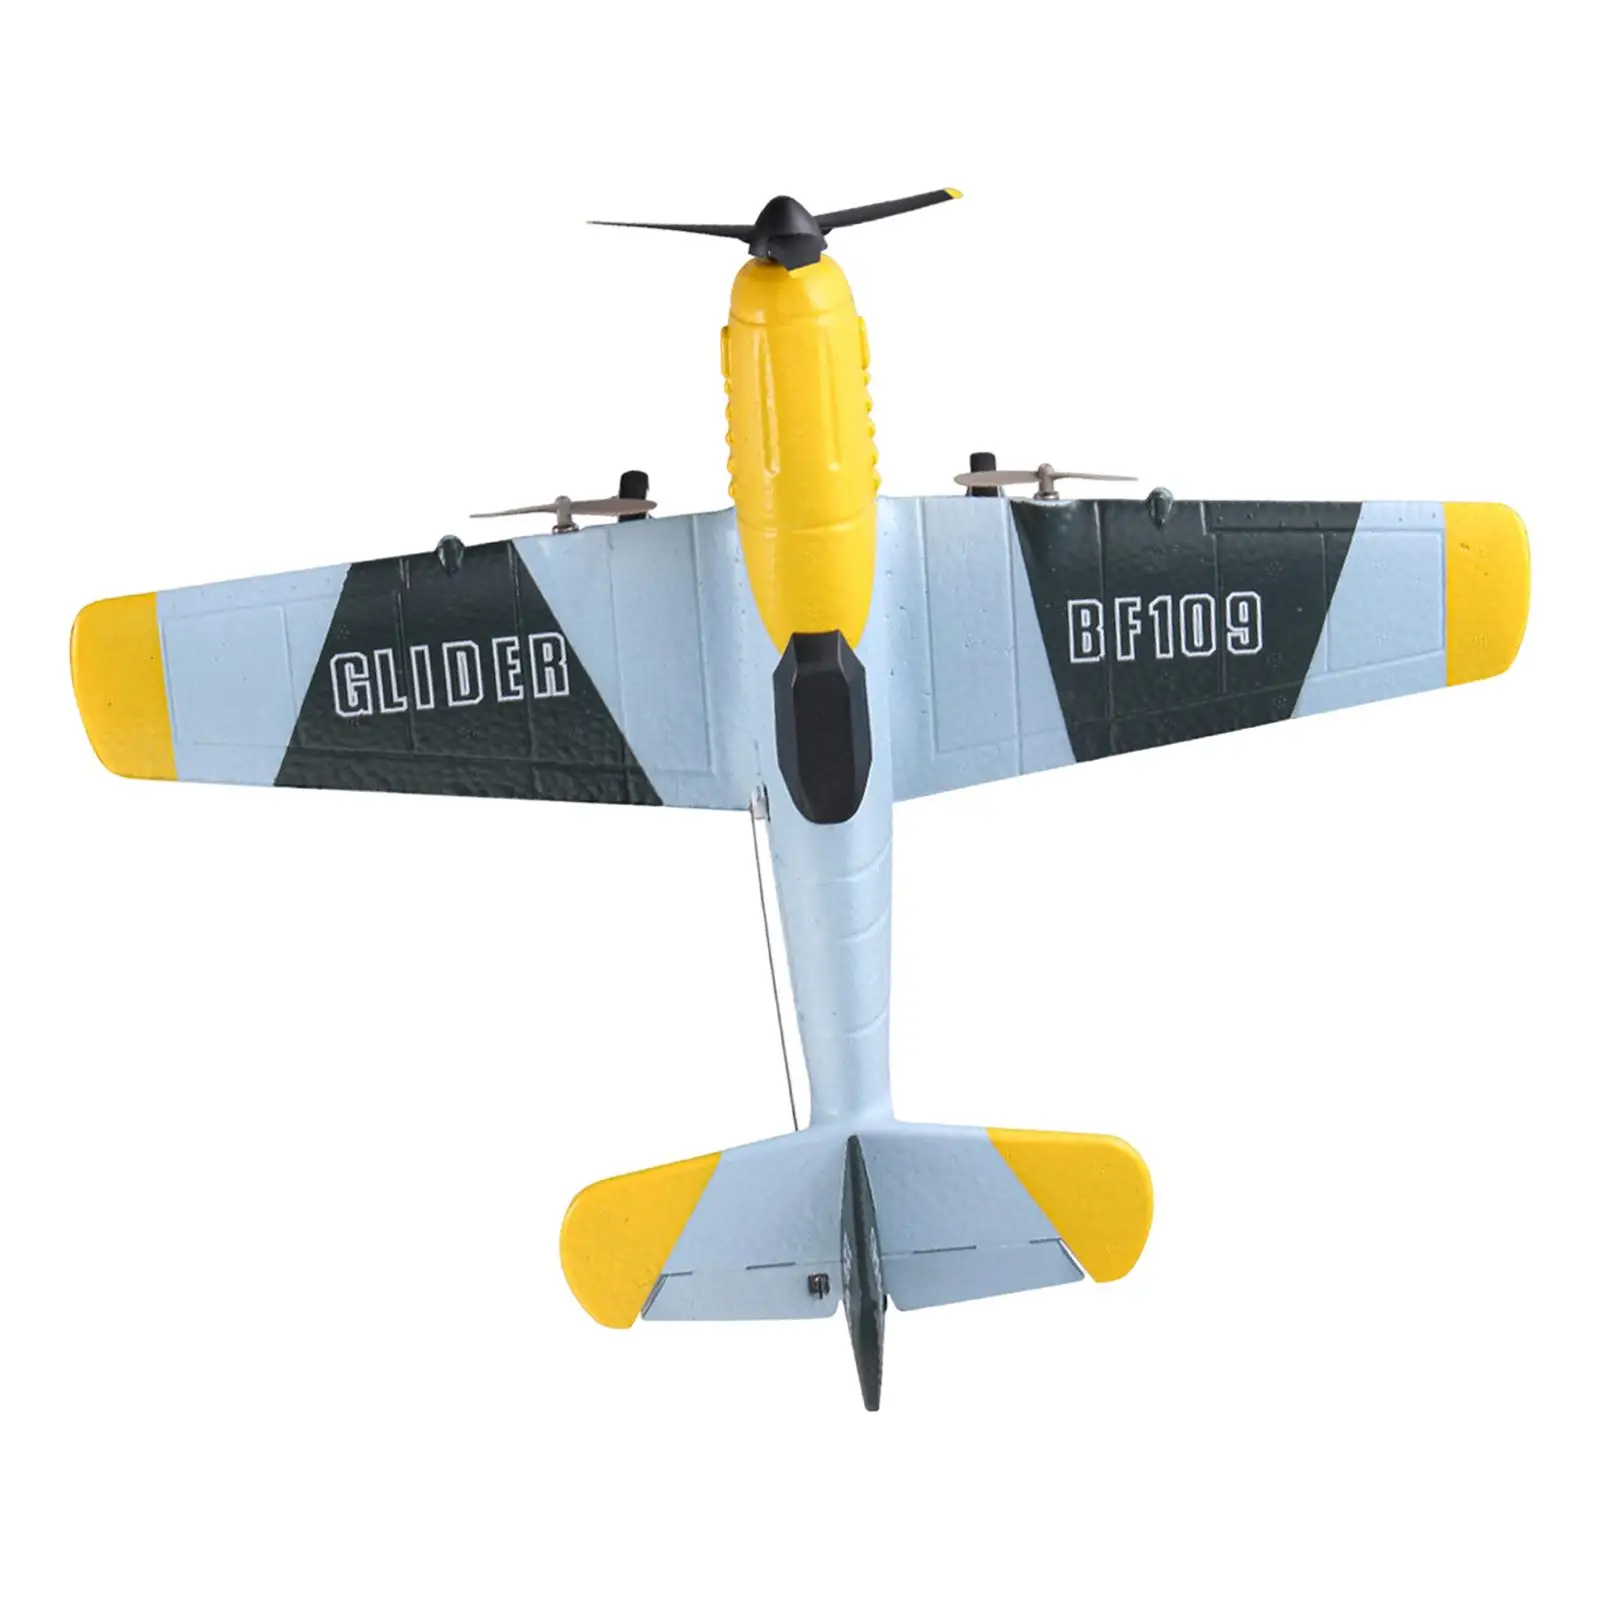 RC Plane Gift Ready to Easy to Fly Lightweight 2.4G RC Glider Remote Control Airplane for Adults Kids Boys Girls Beginner